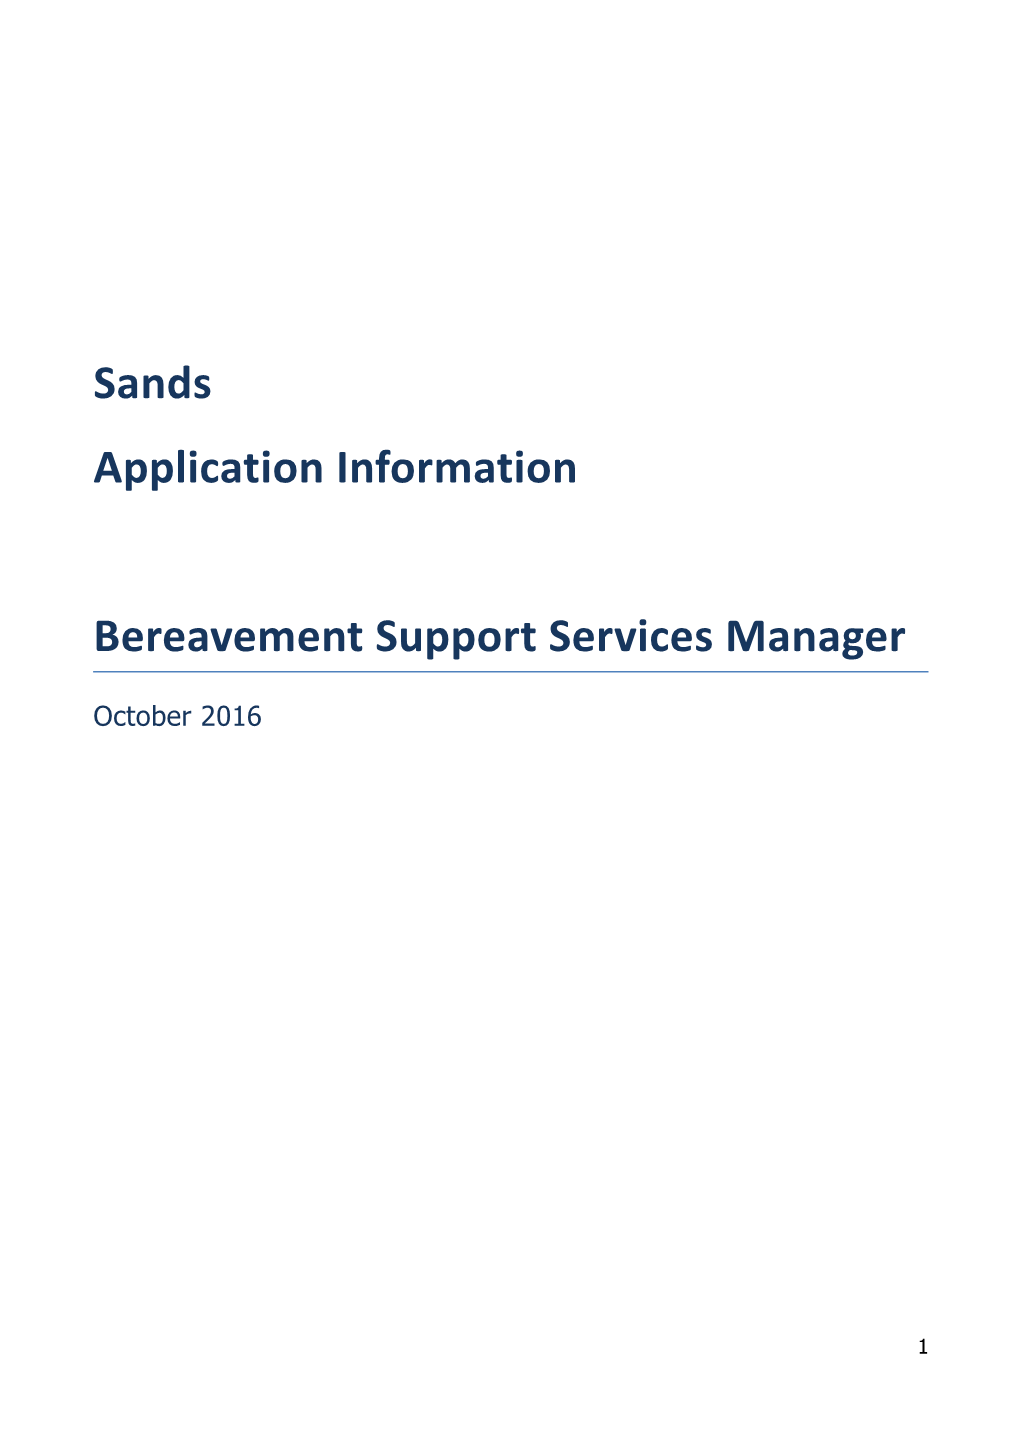 Bereavement Support Services Manager